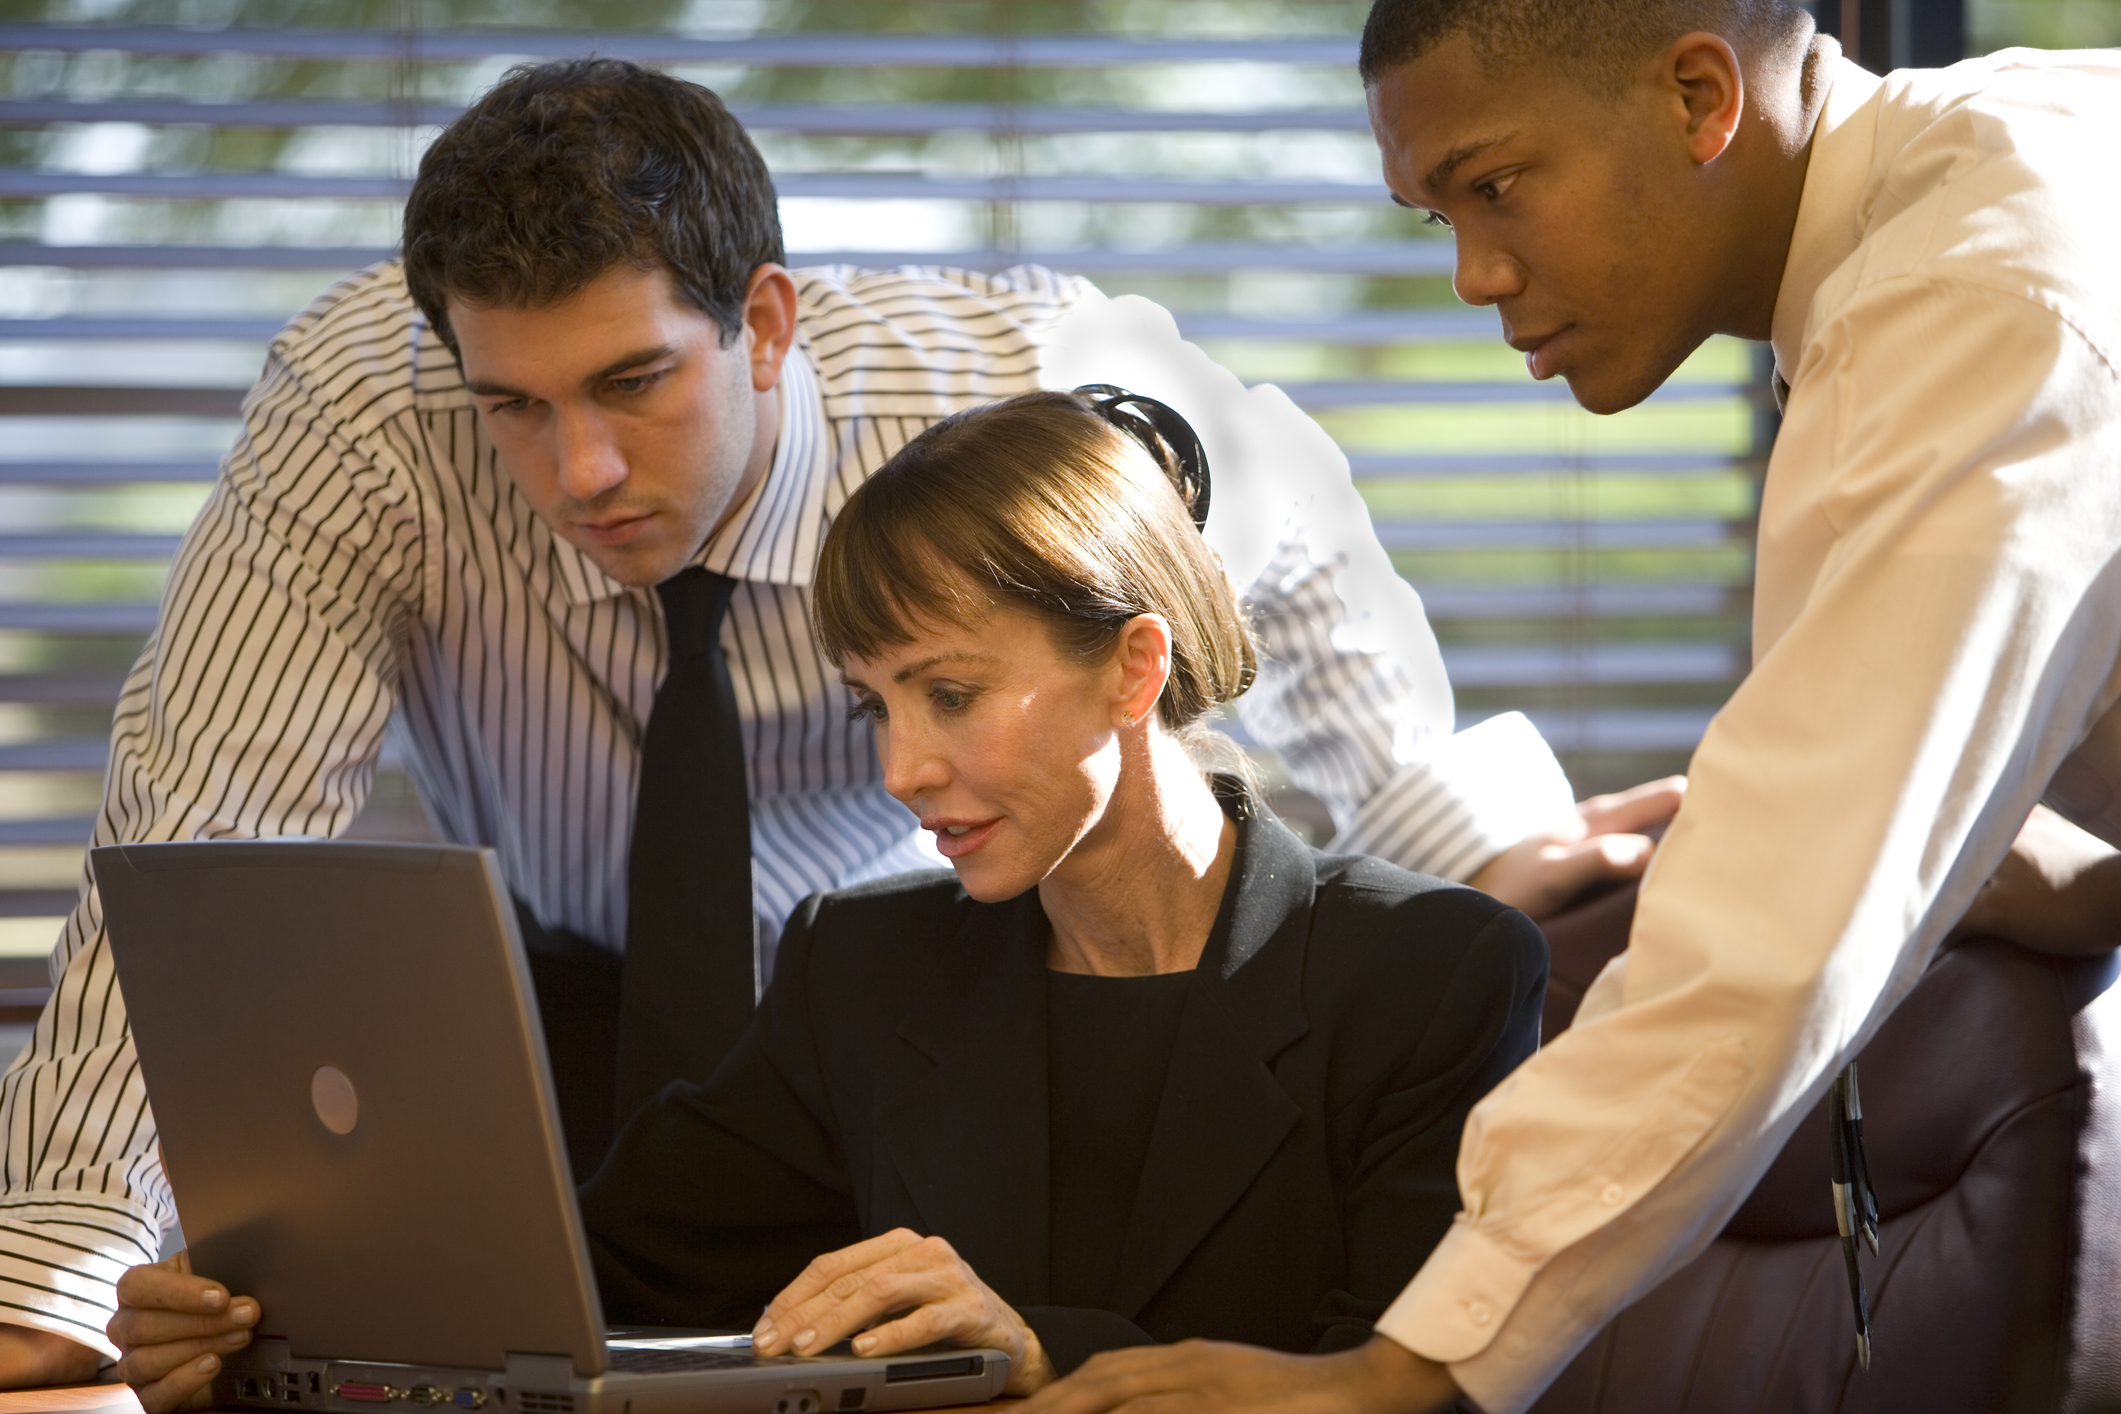 A photo of three businesspeople working together in front of a laptop computer.